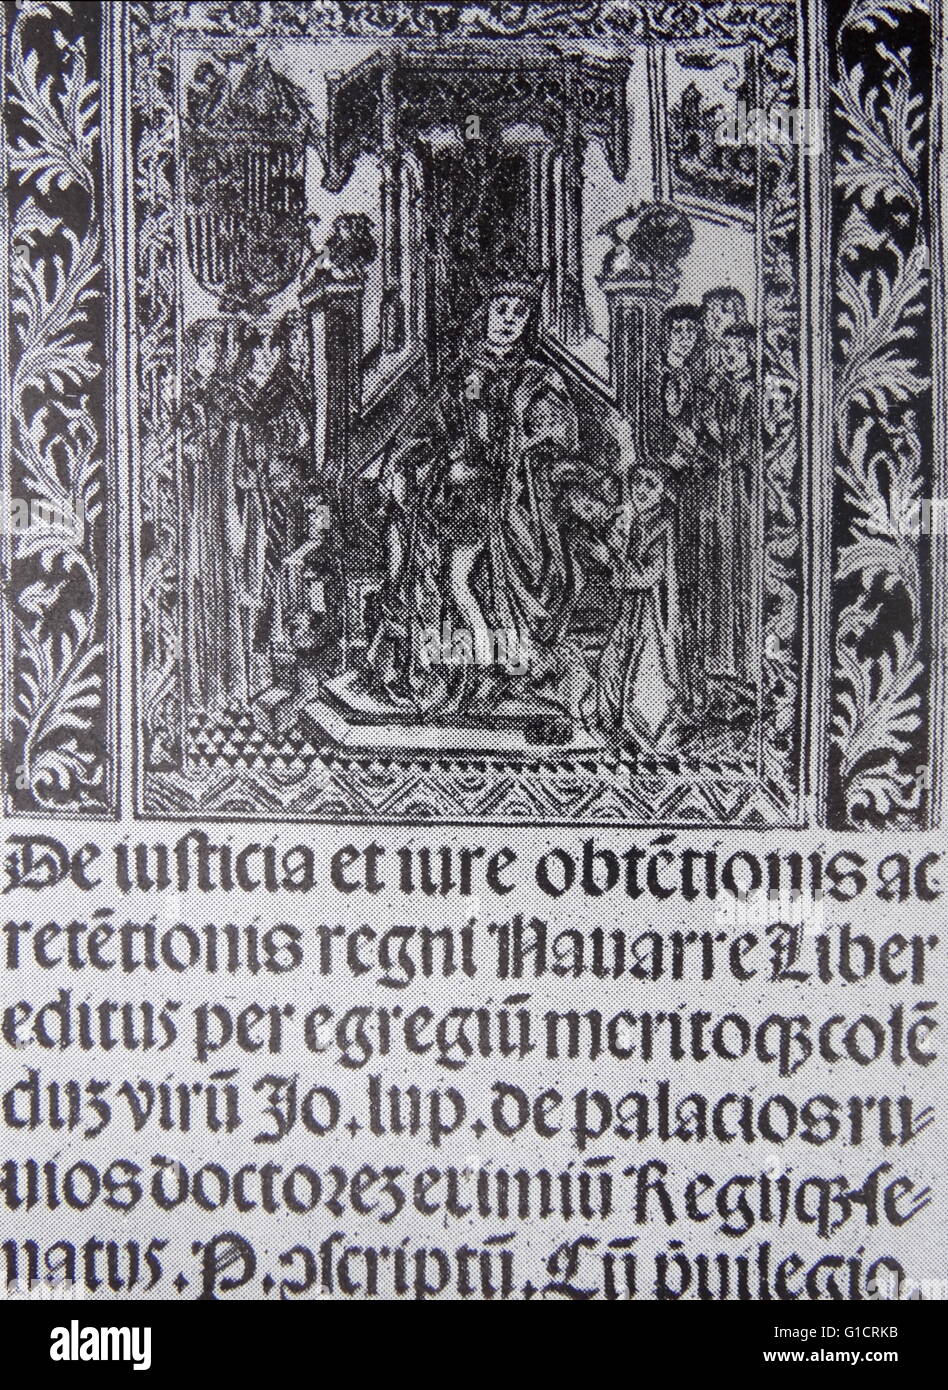 requirimiento by Juan López de Palacios Rubios (1450–1524); He is the editor of the famous 'requirimiento' that bears his name; read during the conquest of America to the Indians; members; instructing to submit peacefully. In the text they informed the natives that they were vassals of the Castilian monarch and subjects of the 'Pope' and; if they oppose they would be subjected by force and turned into slaves. Stock Photo